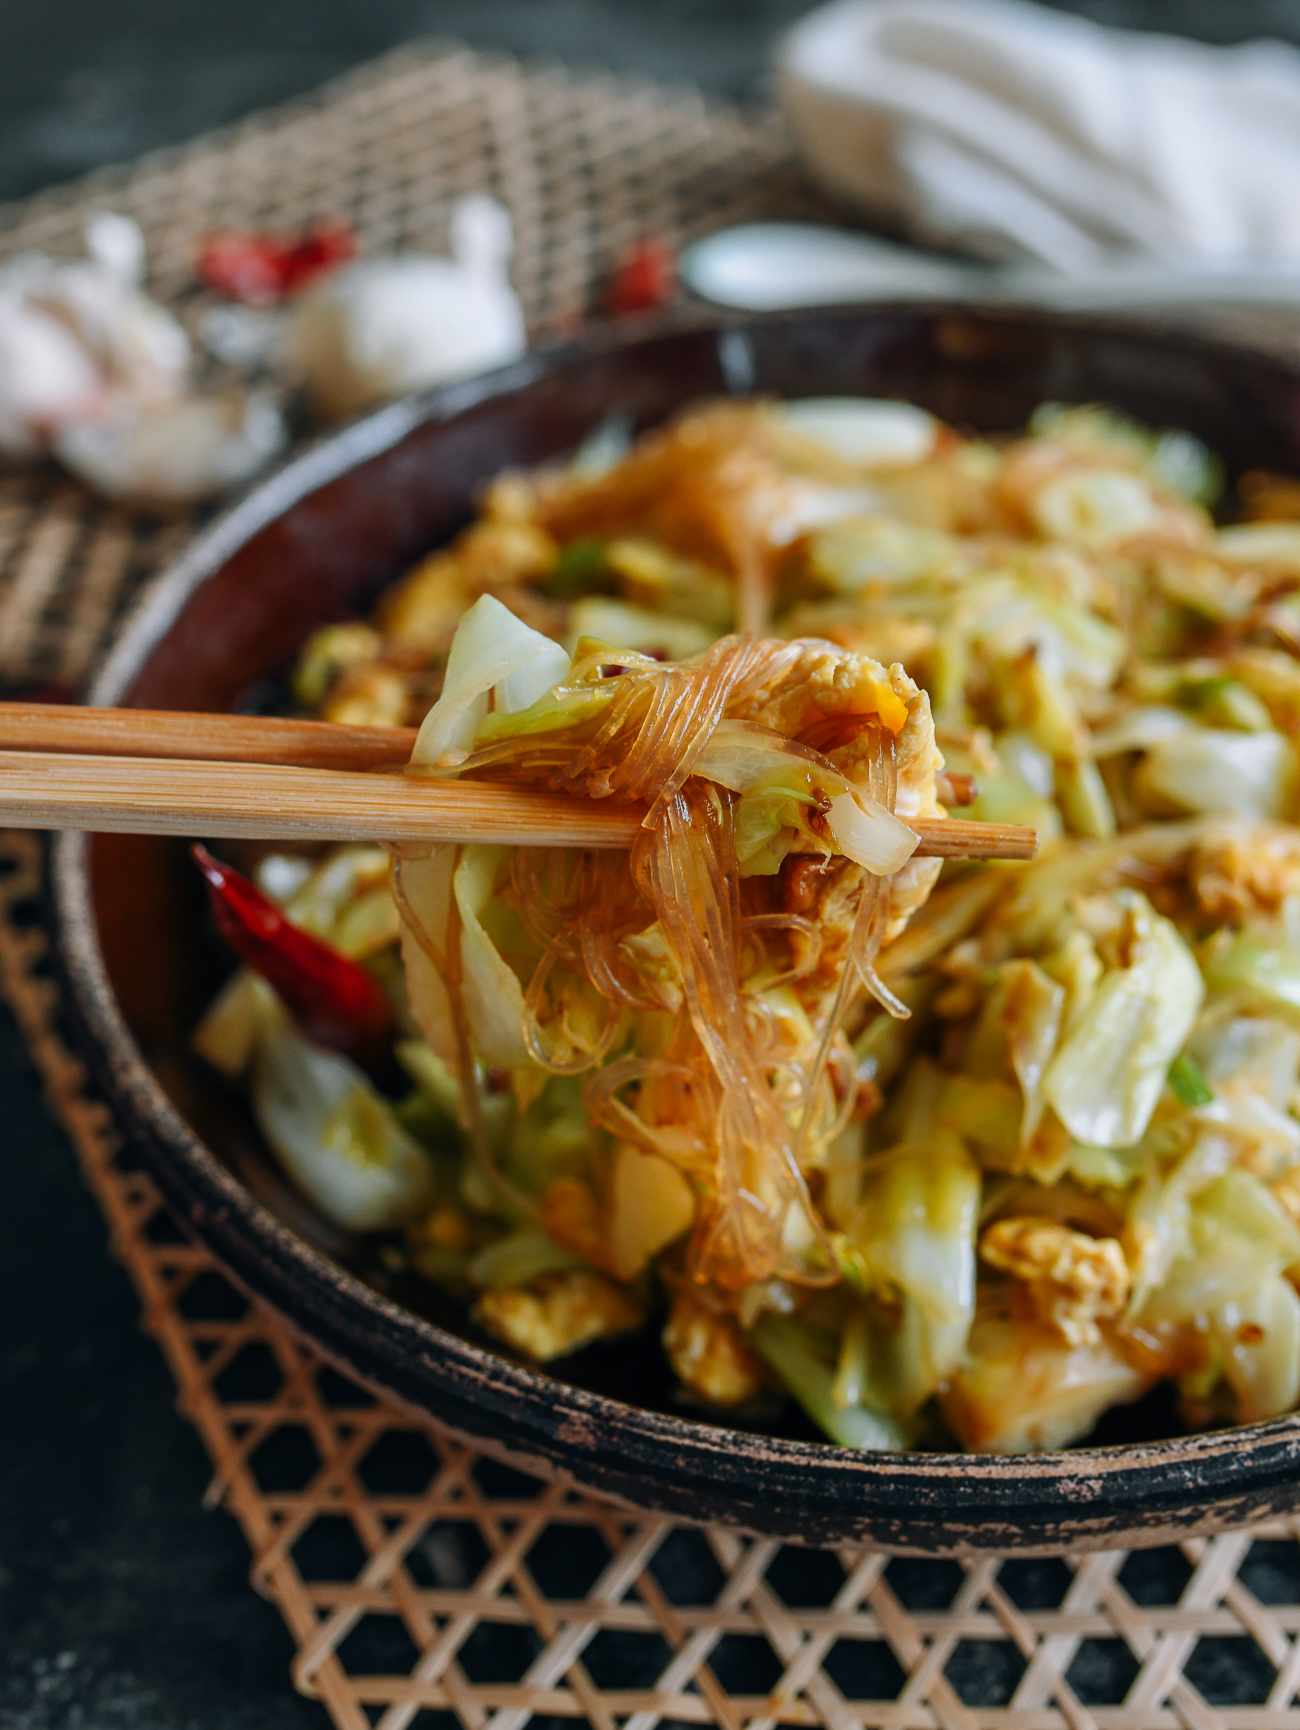 Cabbage stir-fry with noodles and eggs